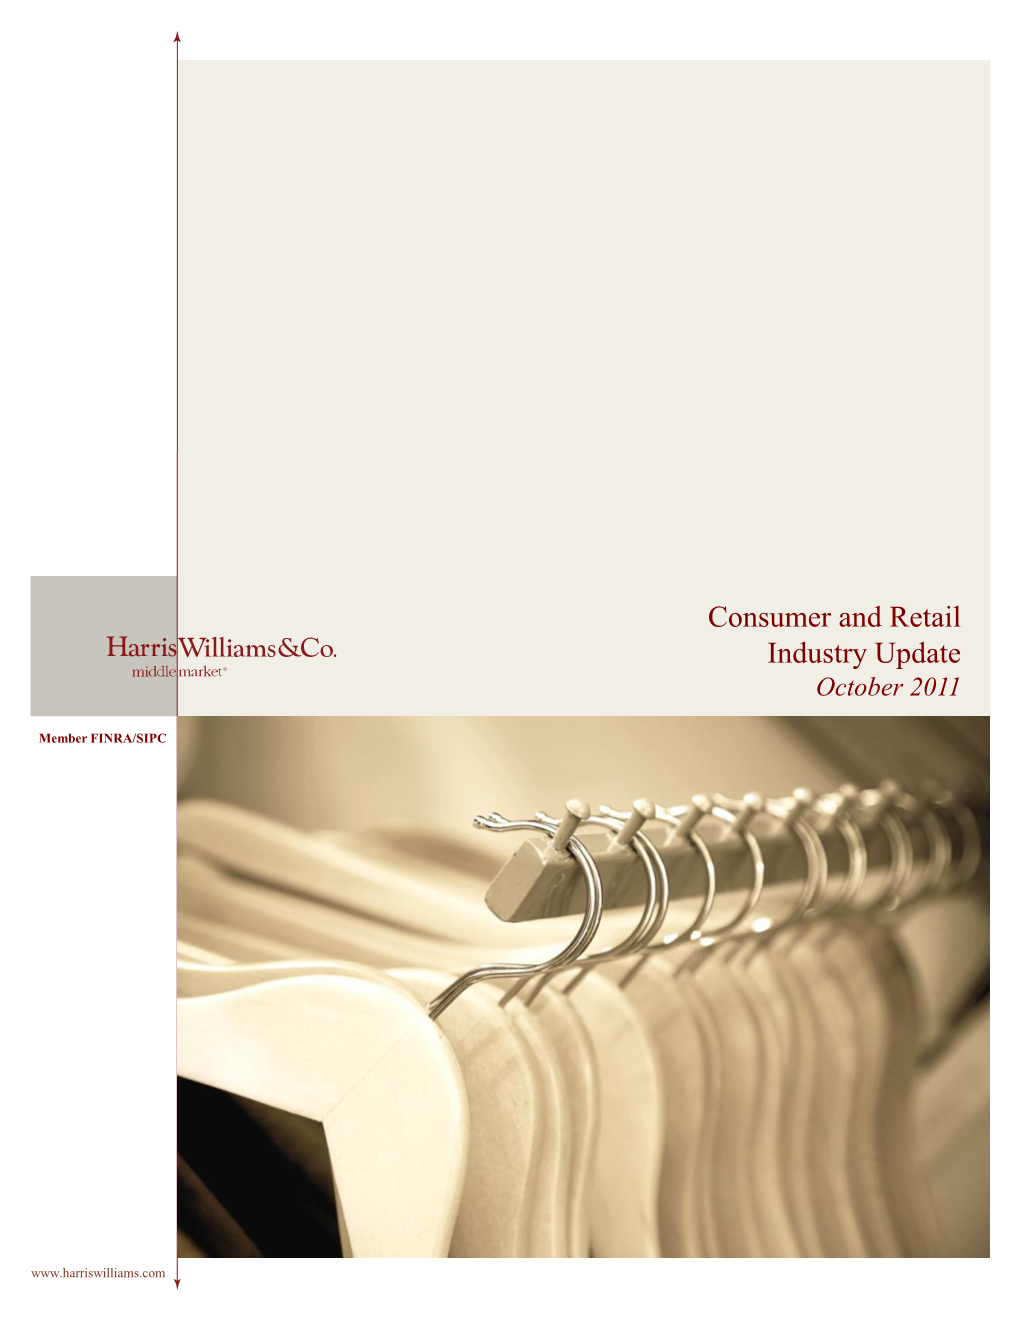 Consumer and Retail Industry Update October 2011